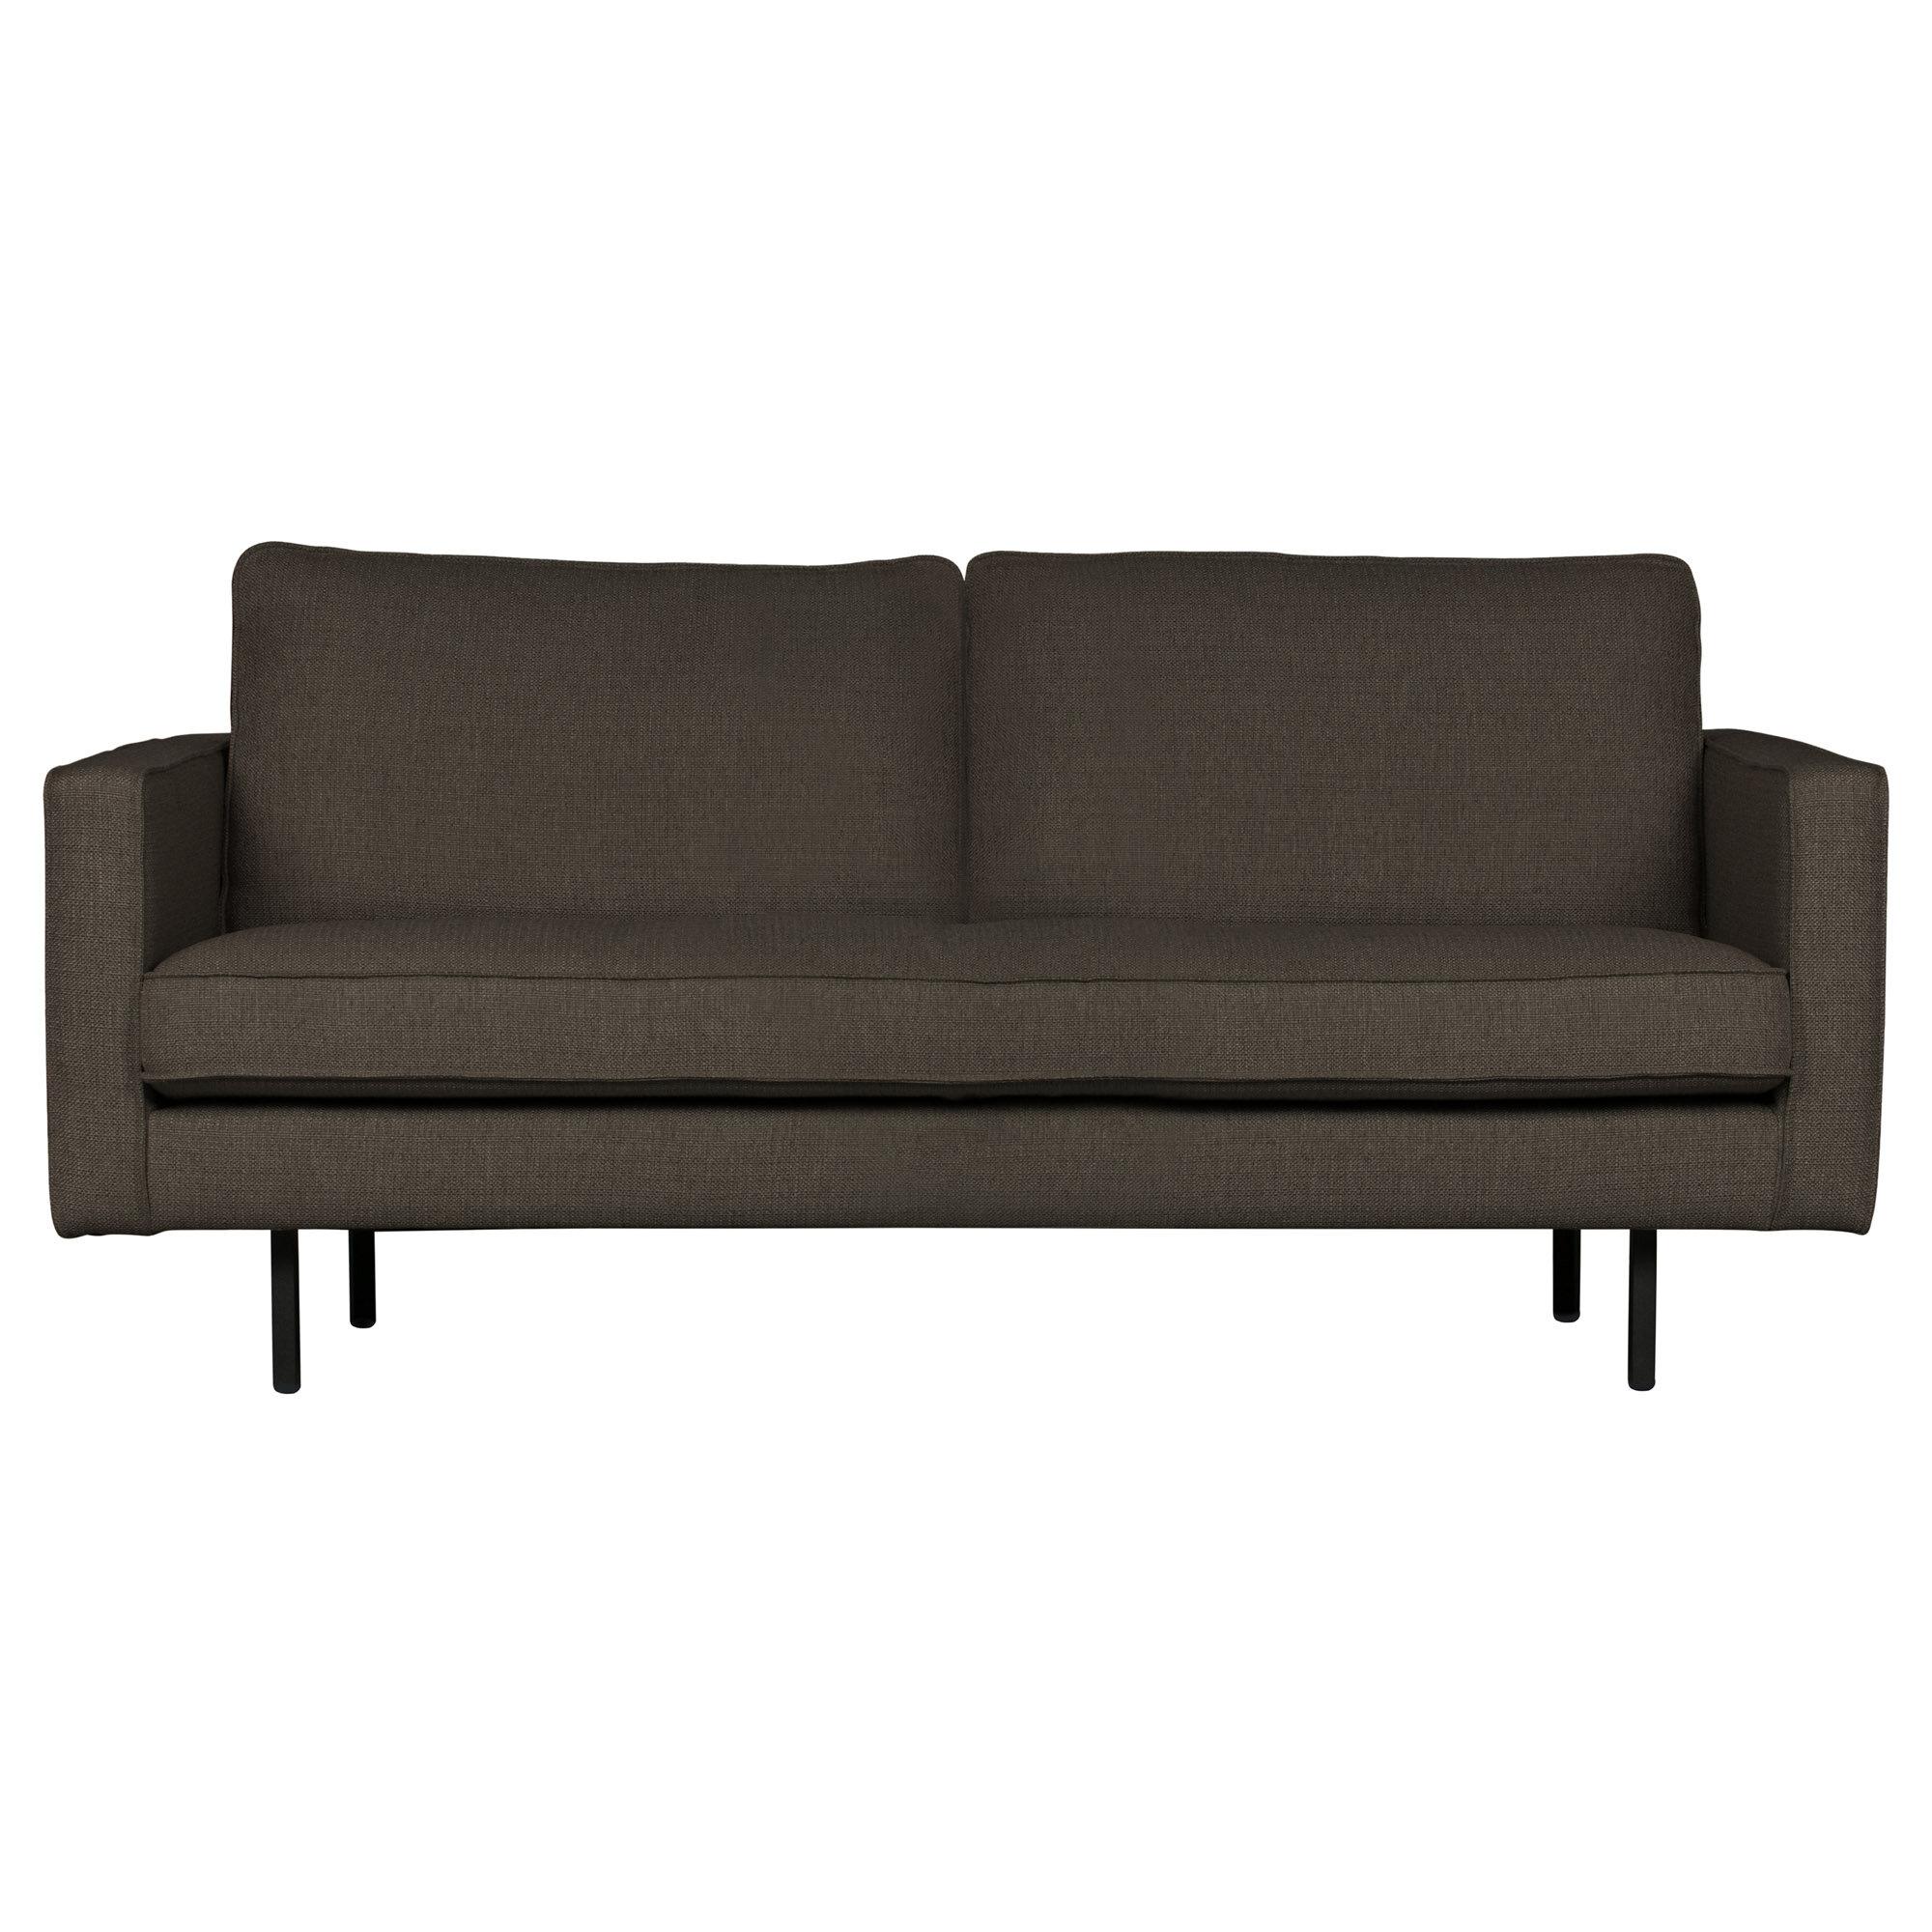  Rodeo Stretched 2,5-pers Sofa - Warm Grey/Brown fra BePureHome i Stof (Varenr: 801542-W)